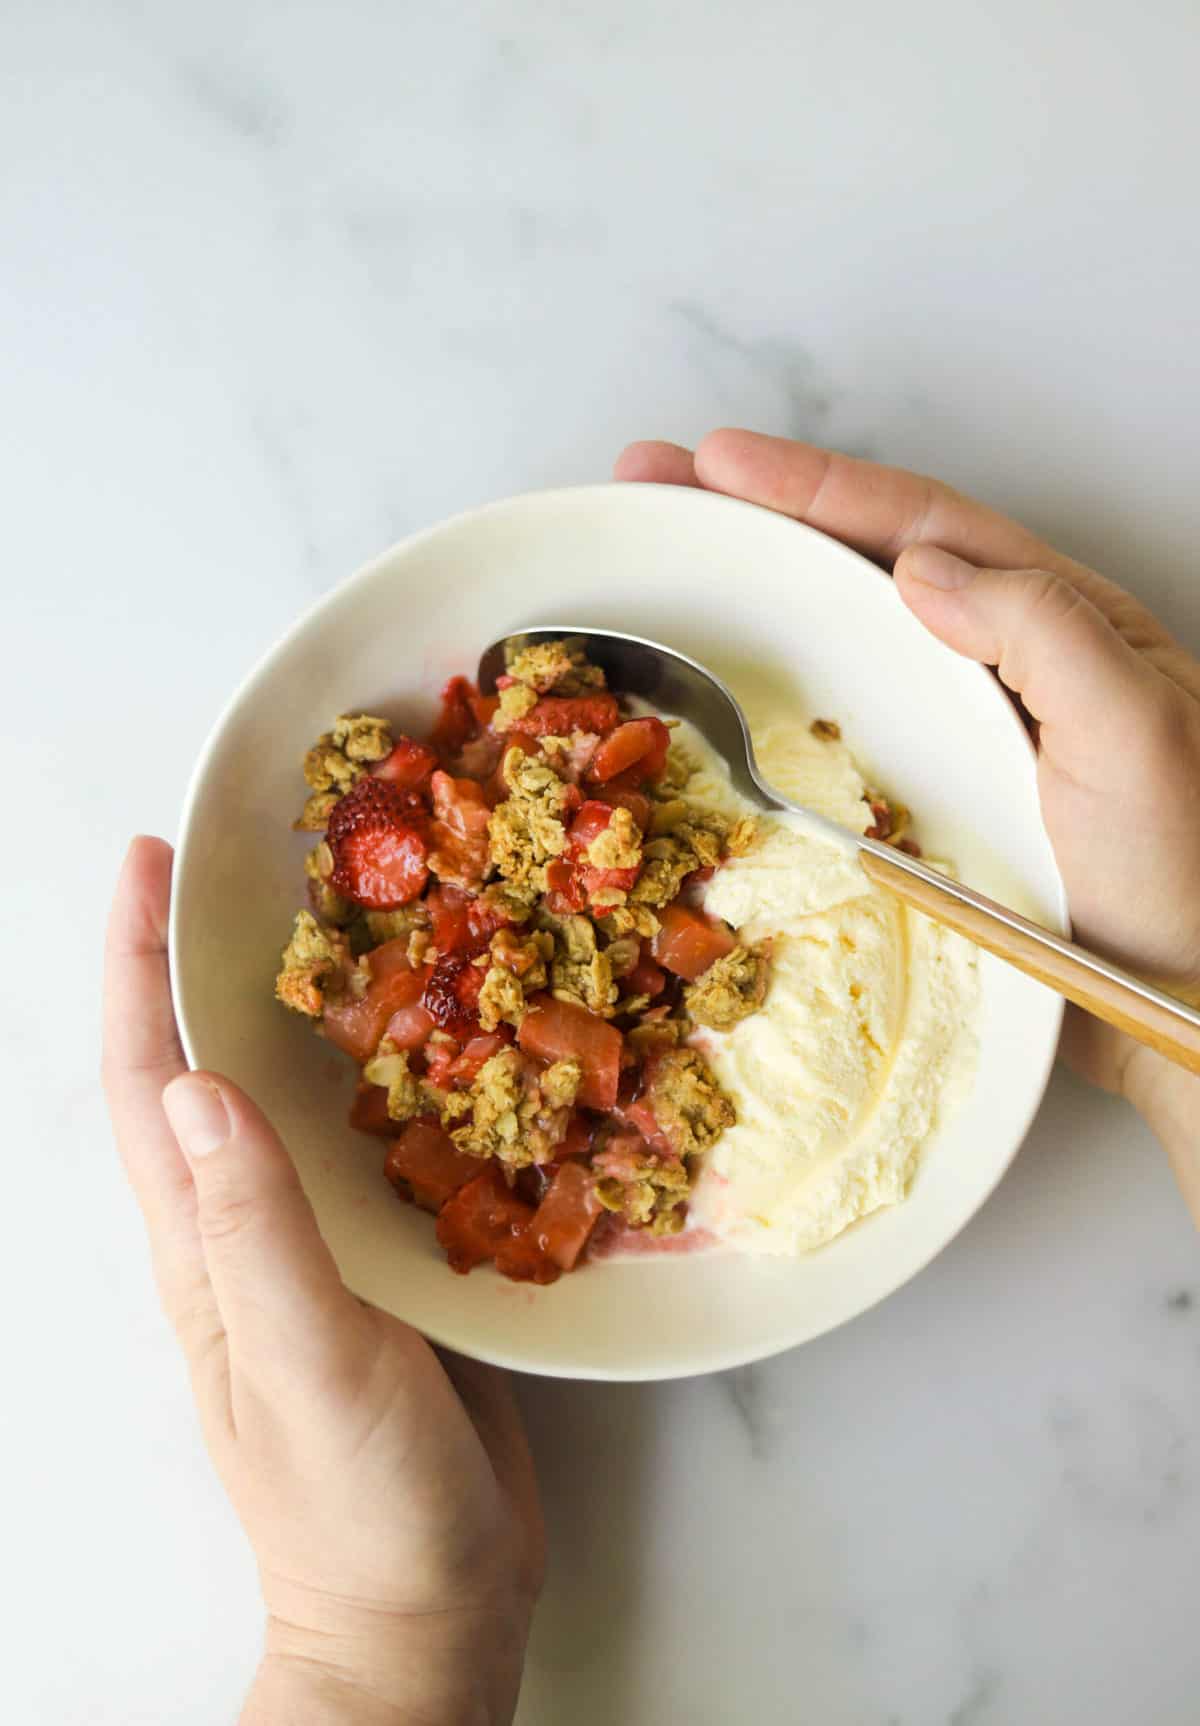 A birds eye view of a hand holding a bowl with strawberry rhubarb crisp with vanilla ice cream.